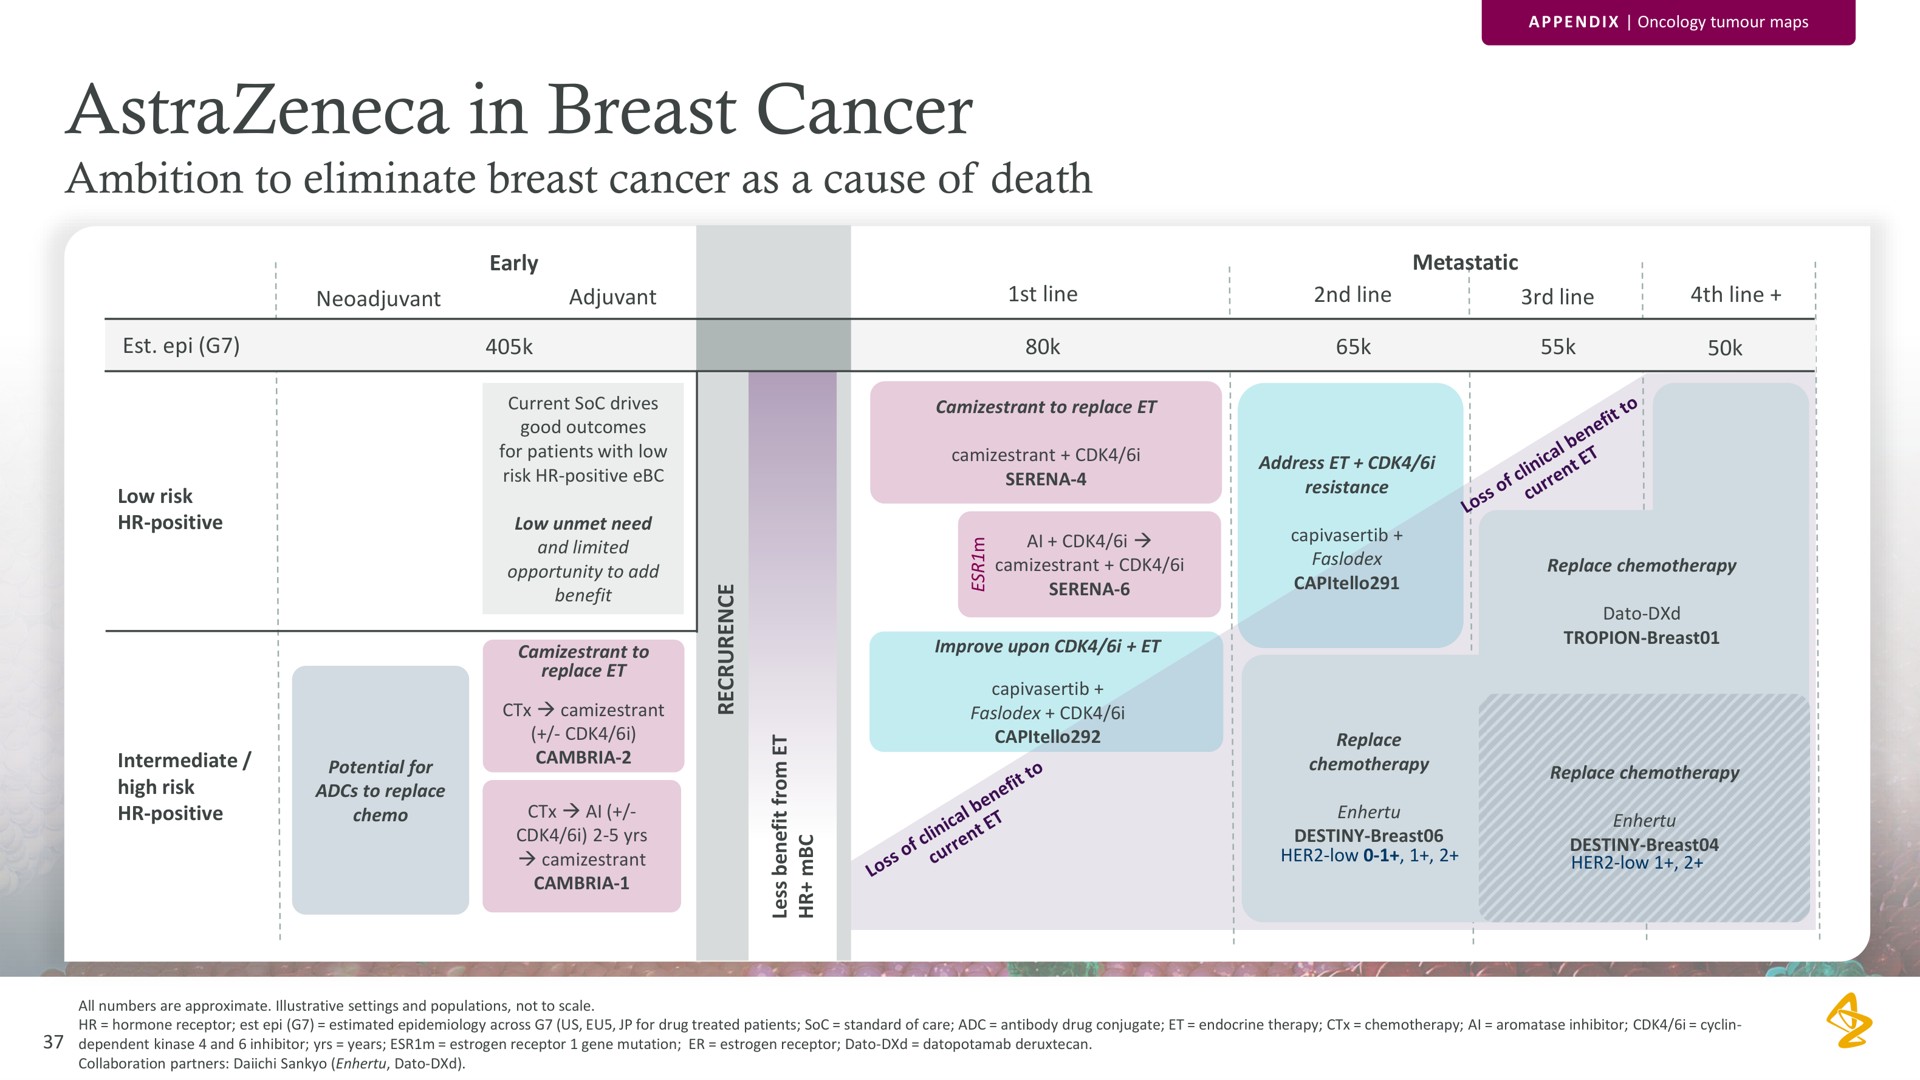 in breast cancer ambition to eliminate breast cancer as a cause of death | AstraZeneca